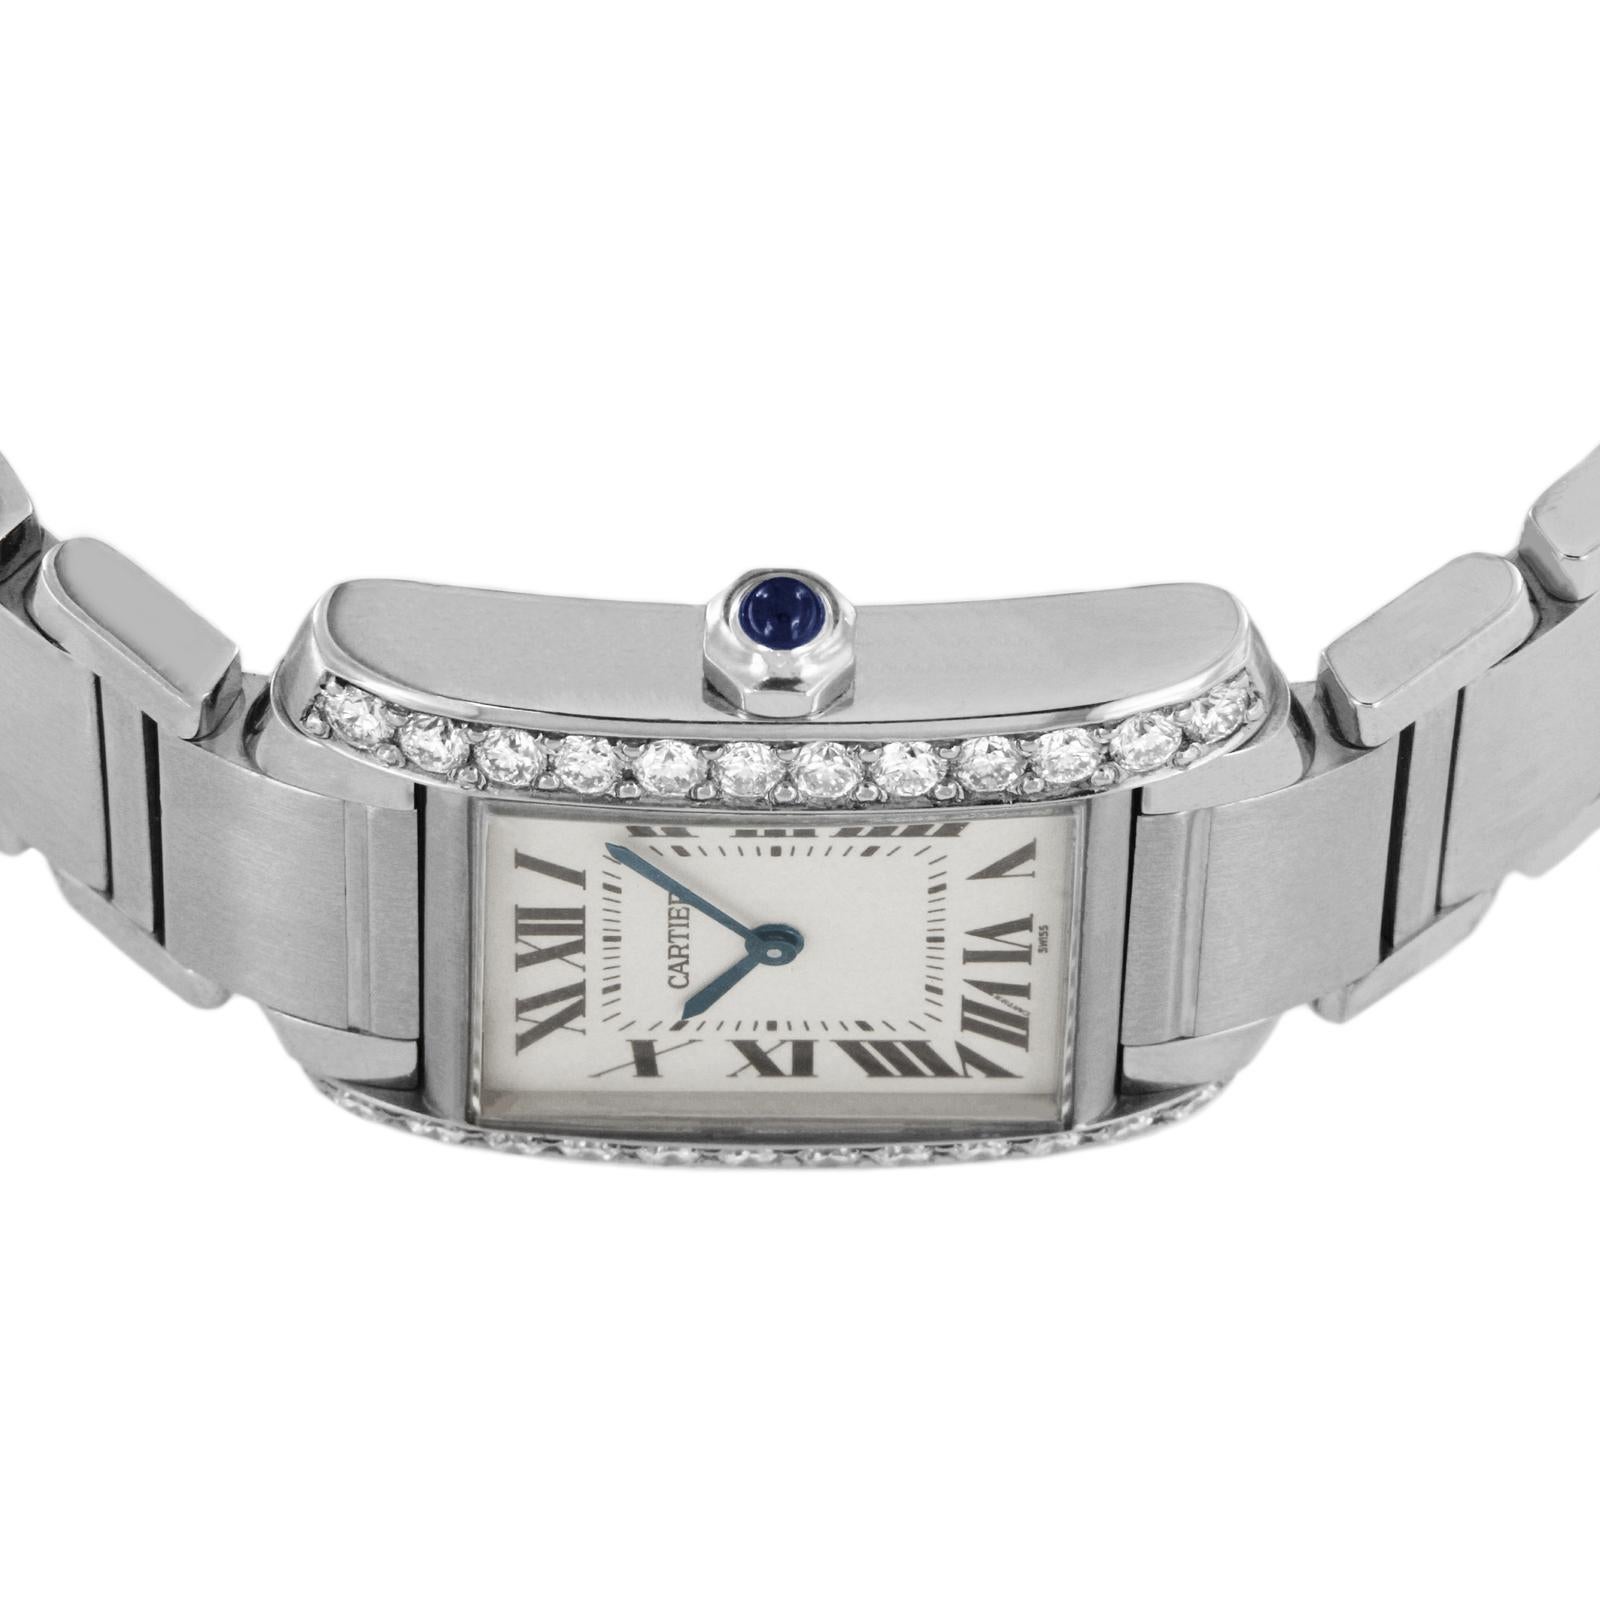 CARTIER TANK FRANCAISE MIDSIZE CUSTOM DIAMOND BEZEL 1.1CT. WATCH 2301

-Mint condition
-Case size: 25x29mm
-Case thickness: 6.6mm
-Stainless steel
-Movement: Quartz 
-White dial with painted black radial roman numerals
-Lug width: 17.7mm
-Deployment